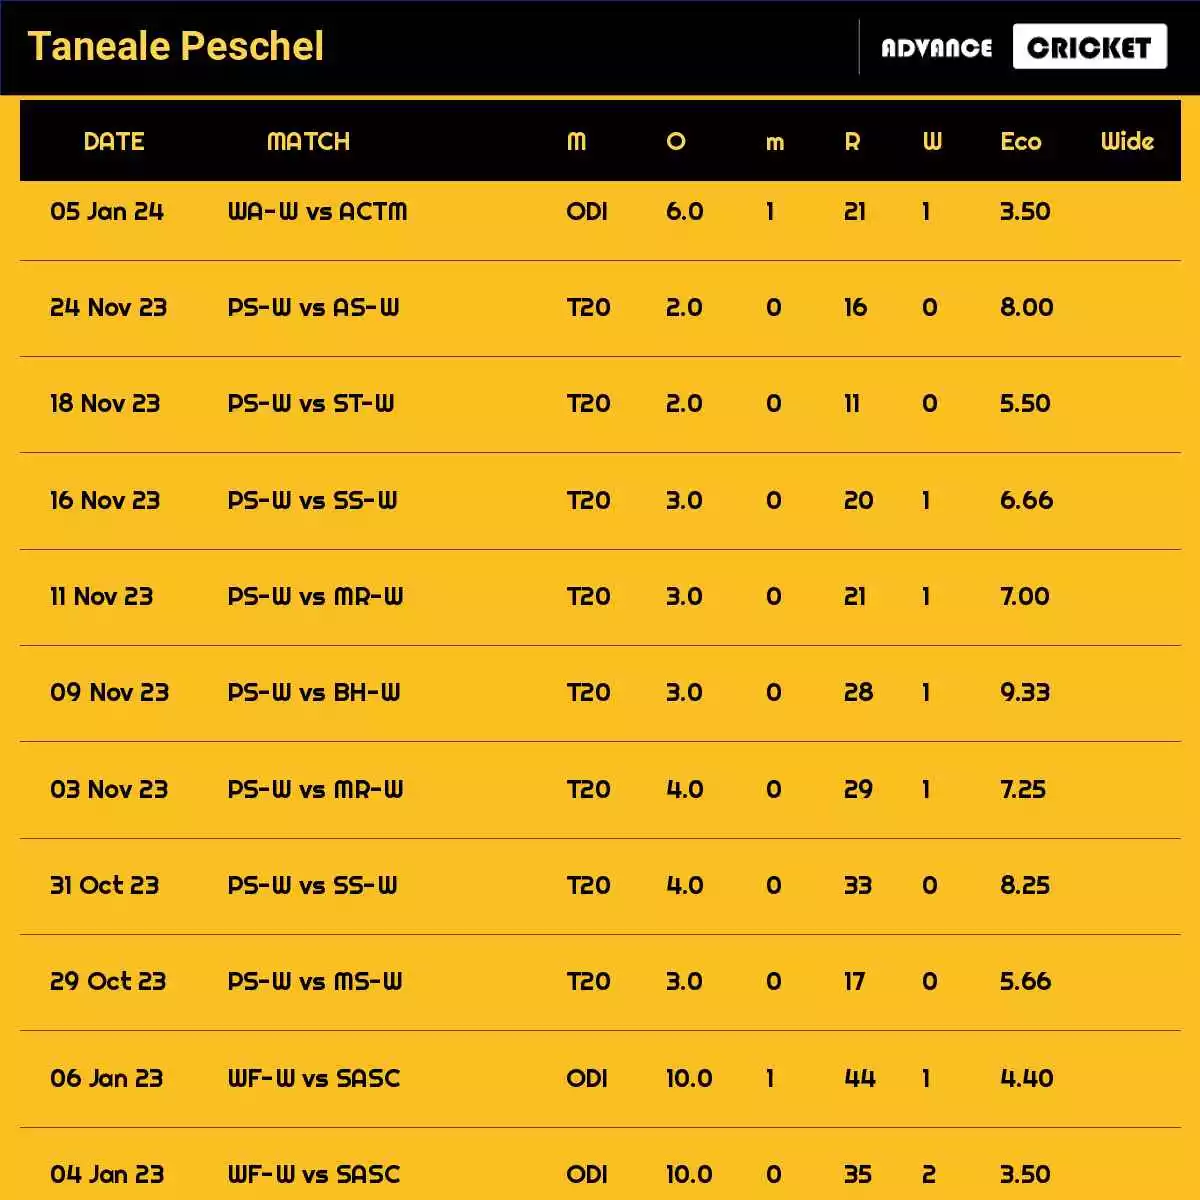 Taneale Peschel Recent Matches Details Date Wise